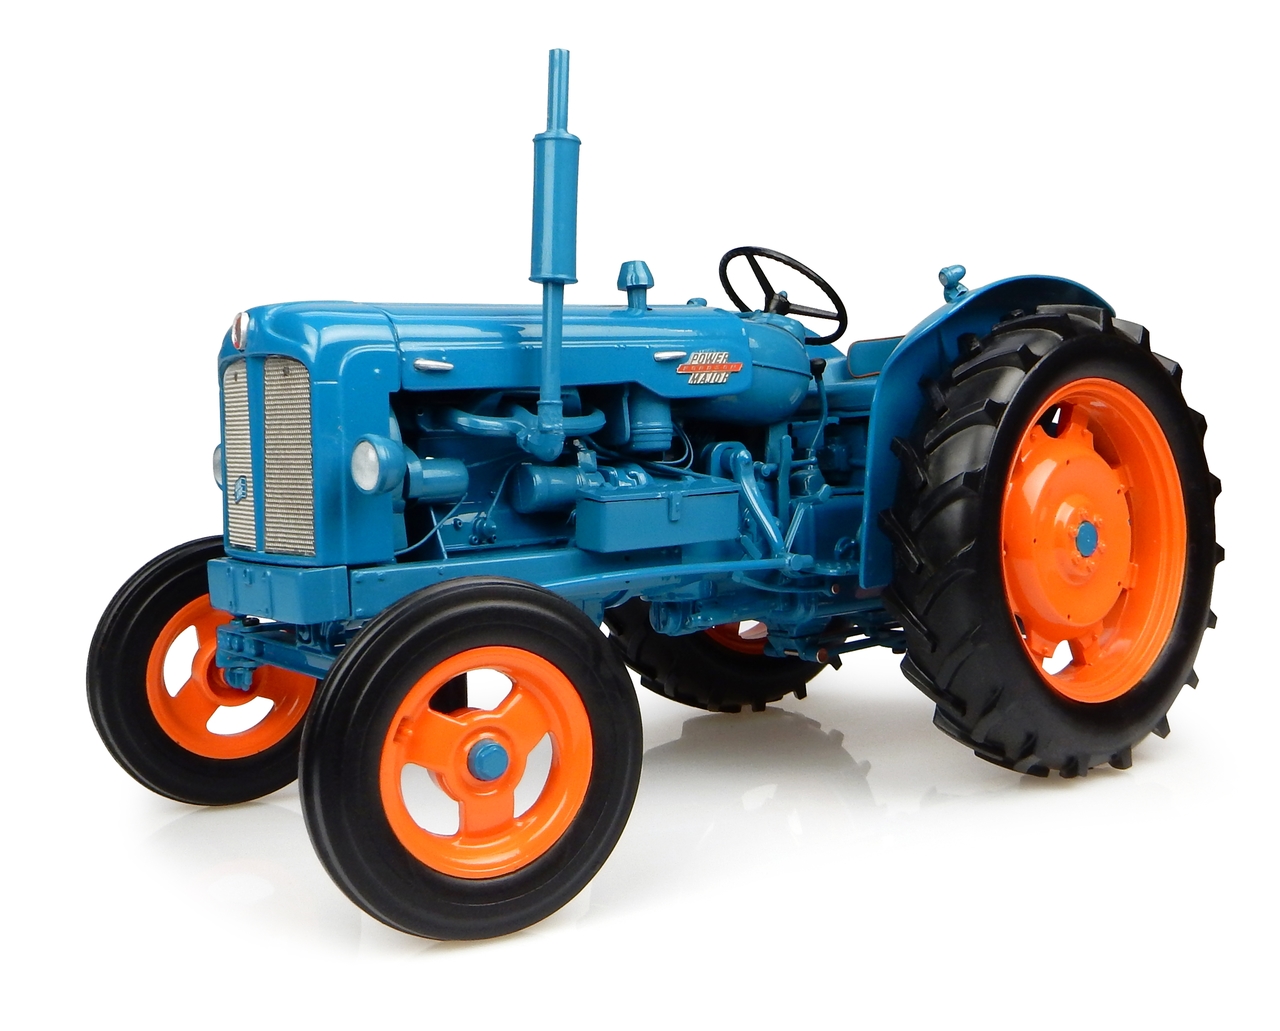 1958 Fordson Power Major Tractor Blue 1/16 Diecast Model by Universal Hobbies